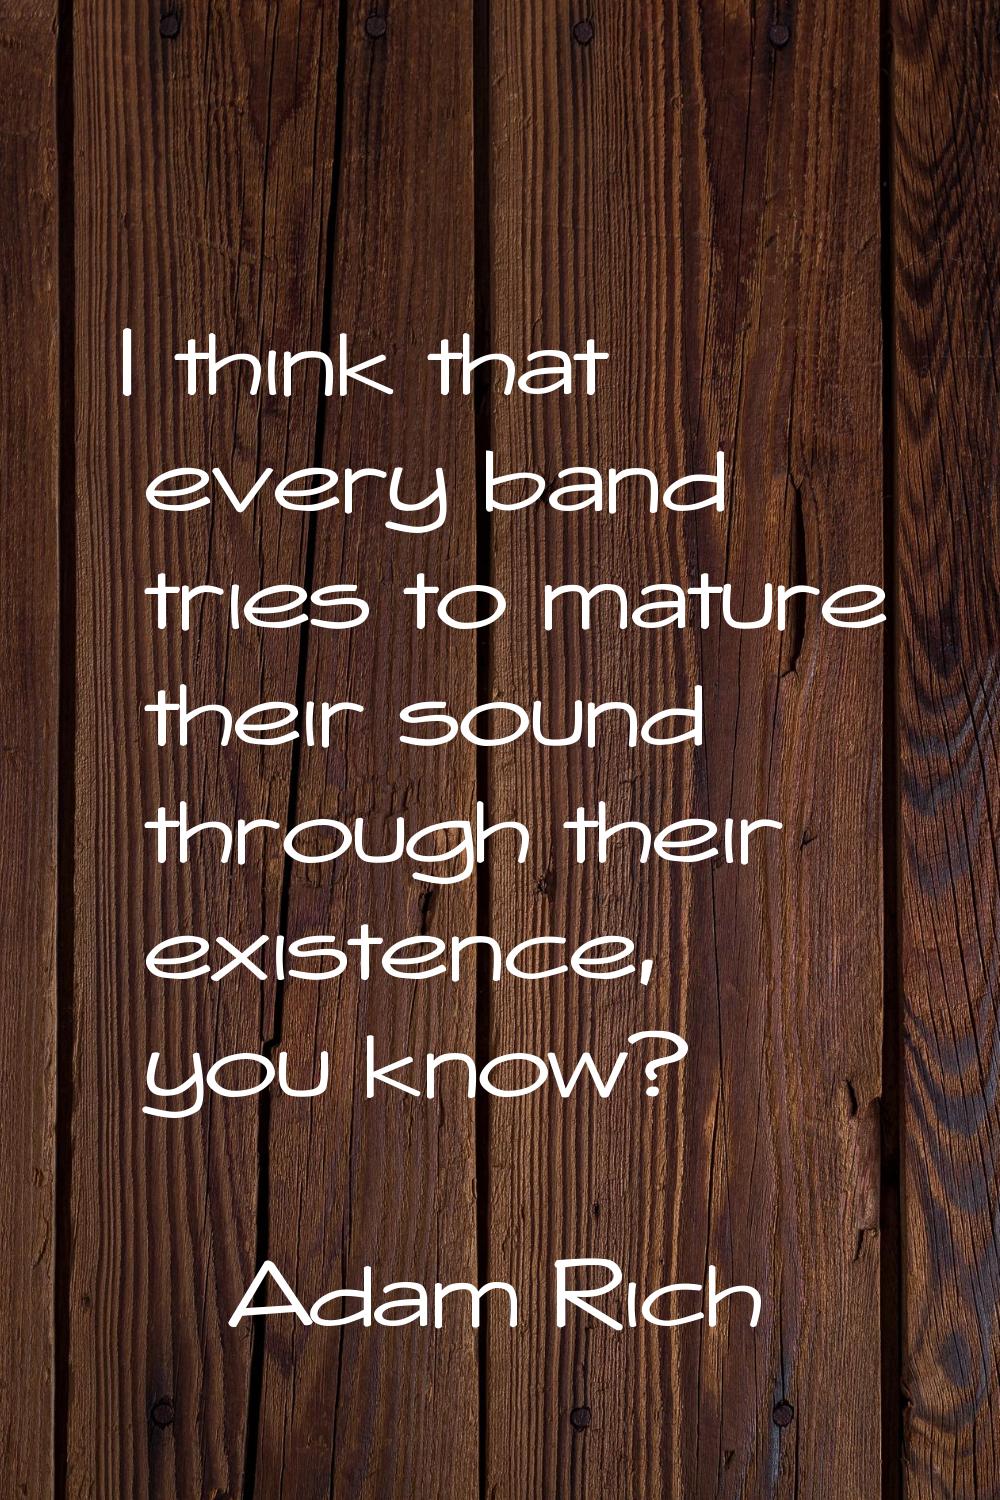 I think that every band tries to mature their sound through their existence, you know?